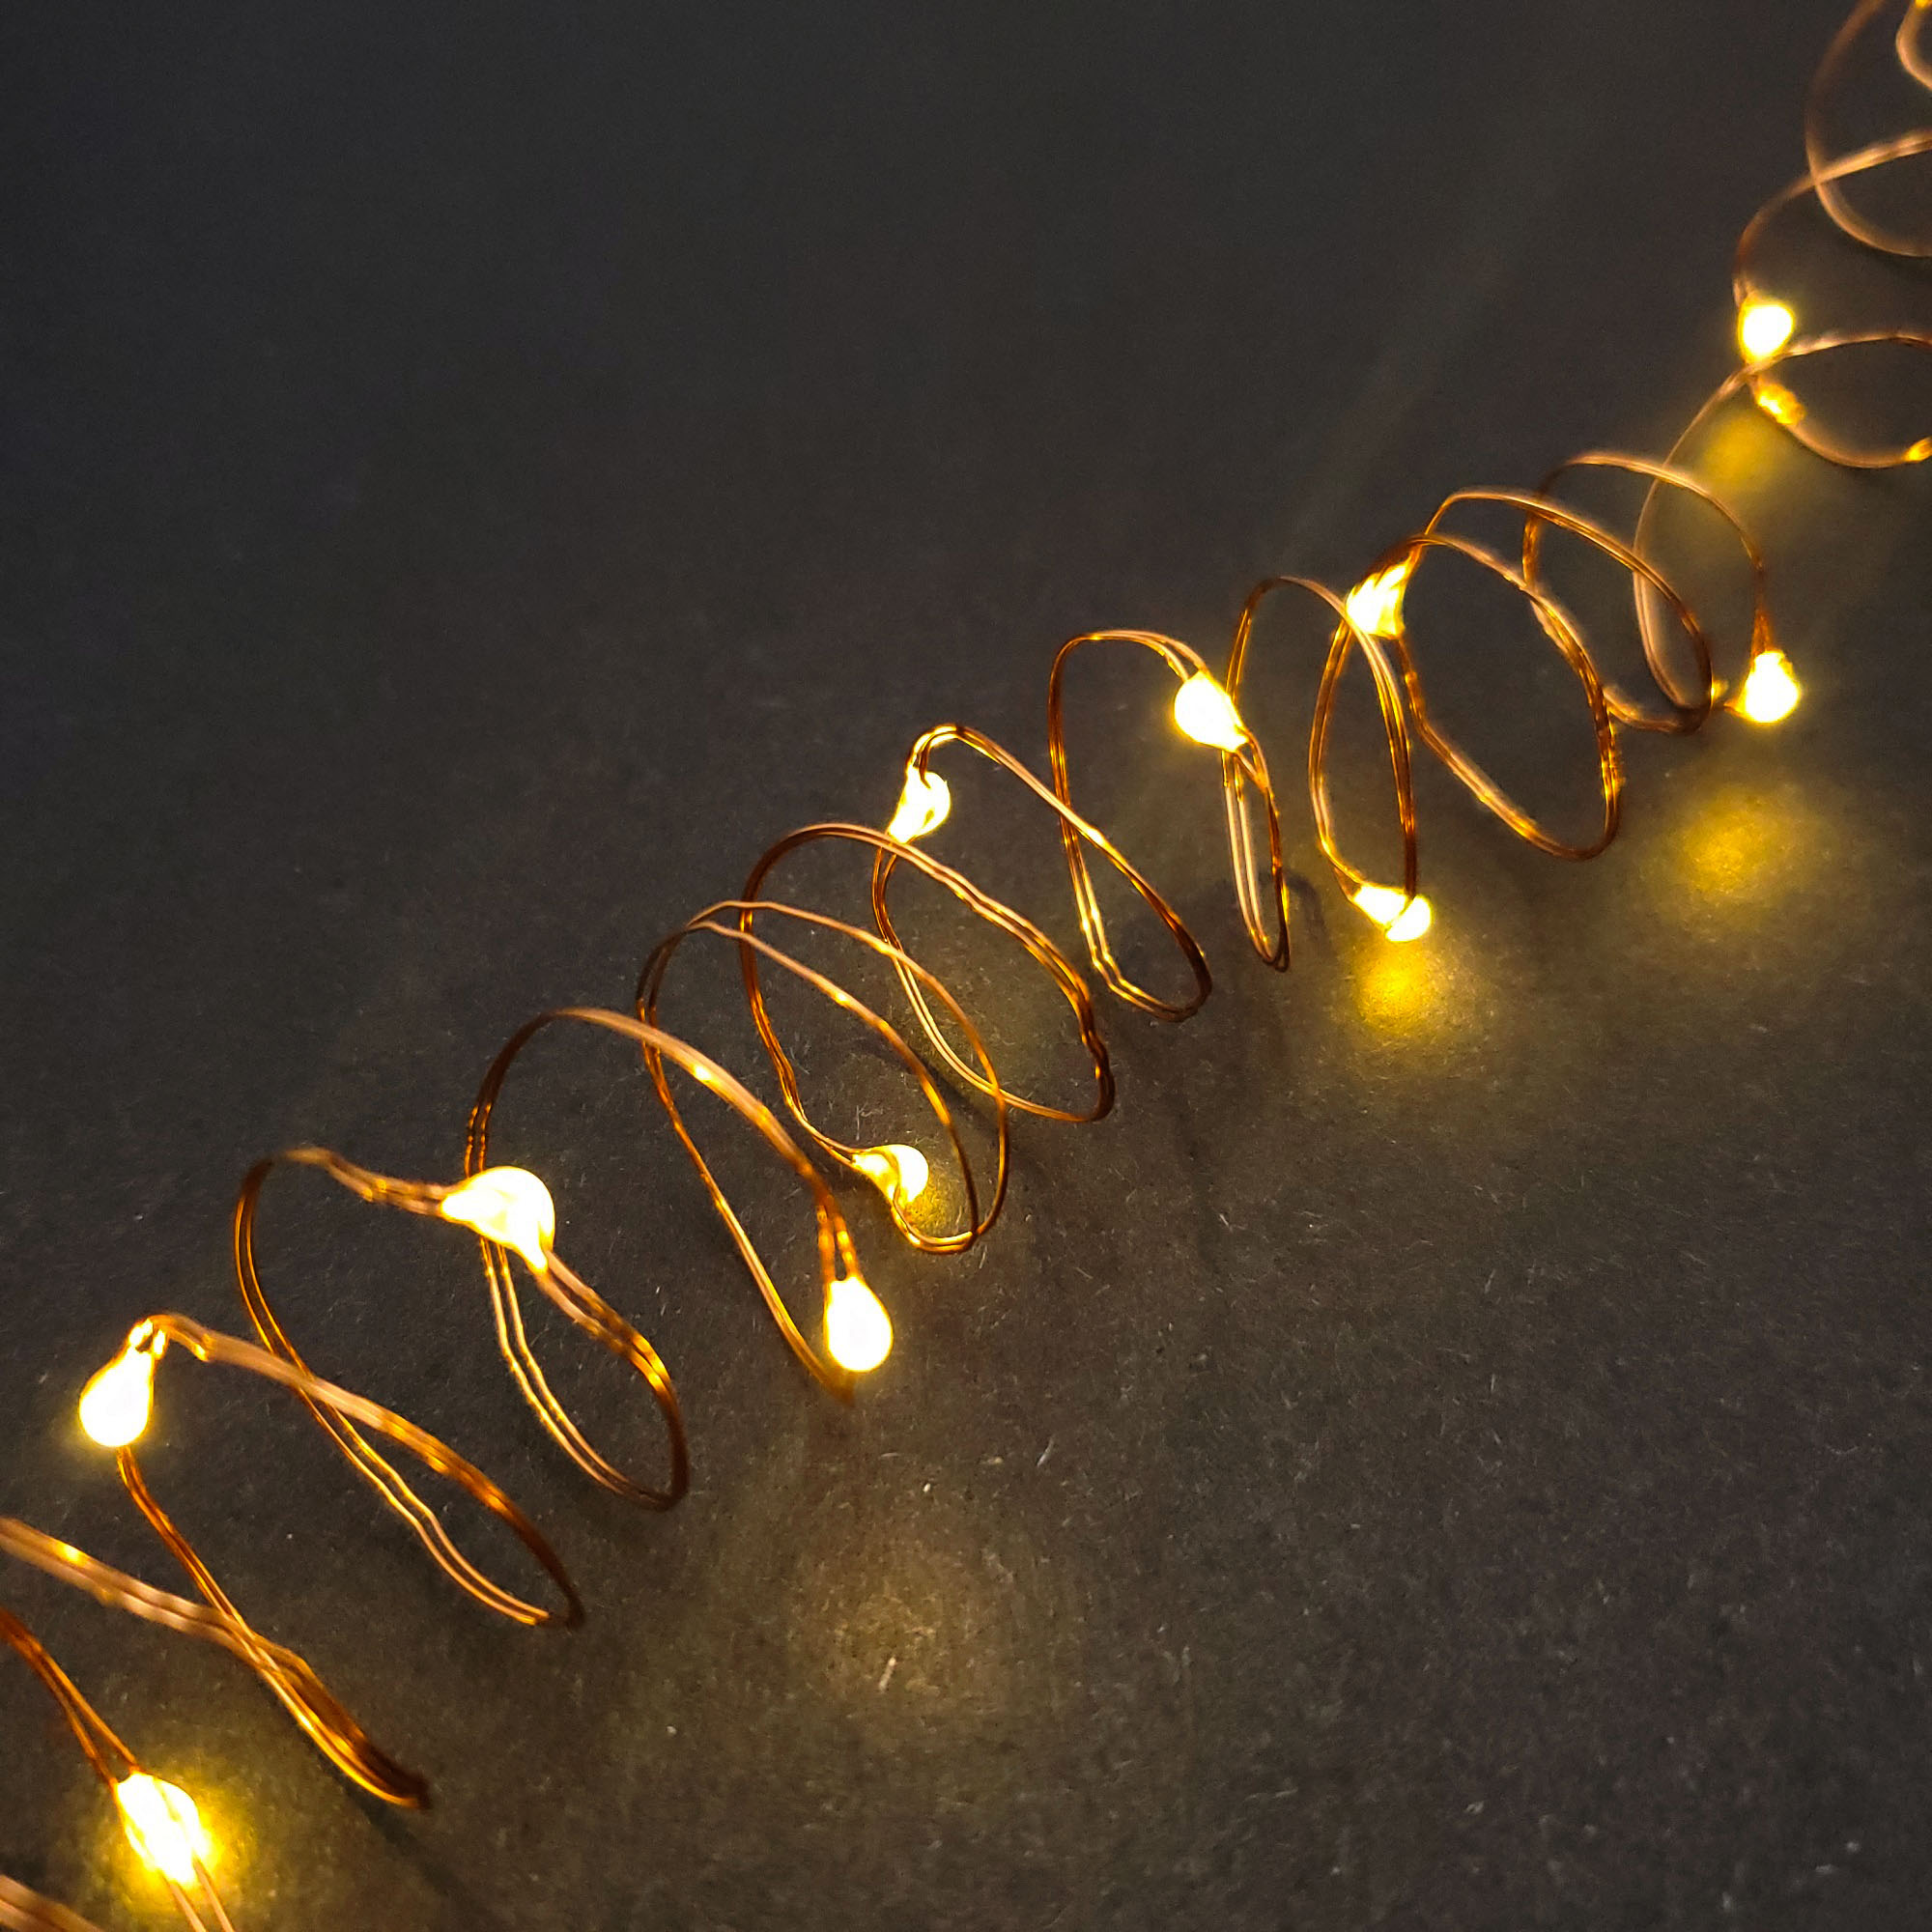 LED Fairy String Light Battery Powered Micro Copper Decor Lamp String Party A4Z6 